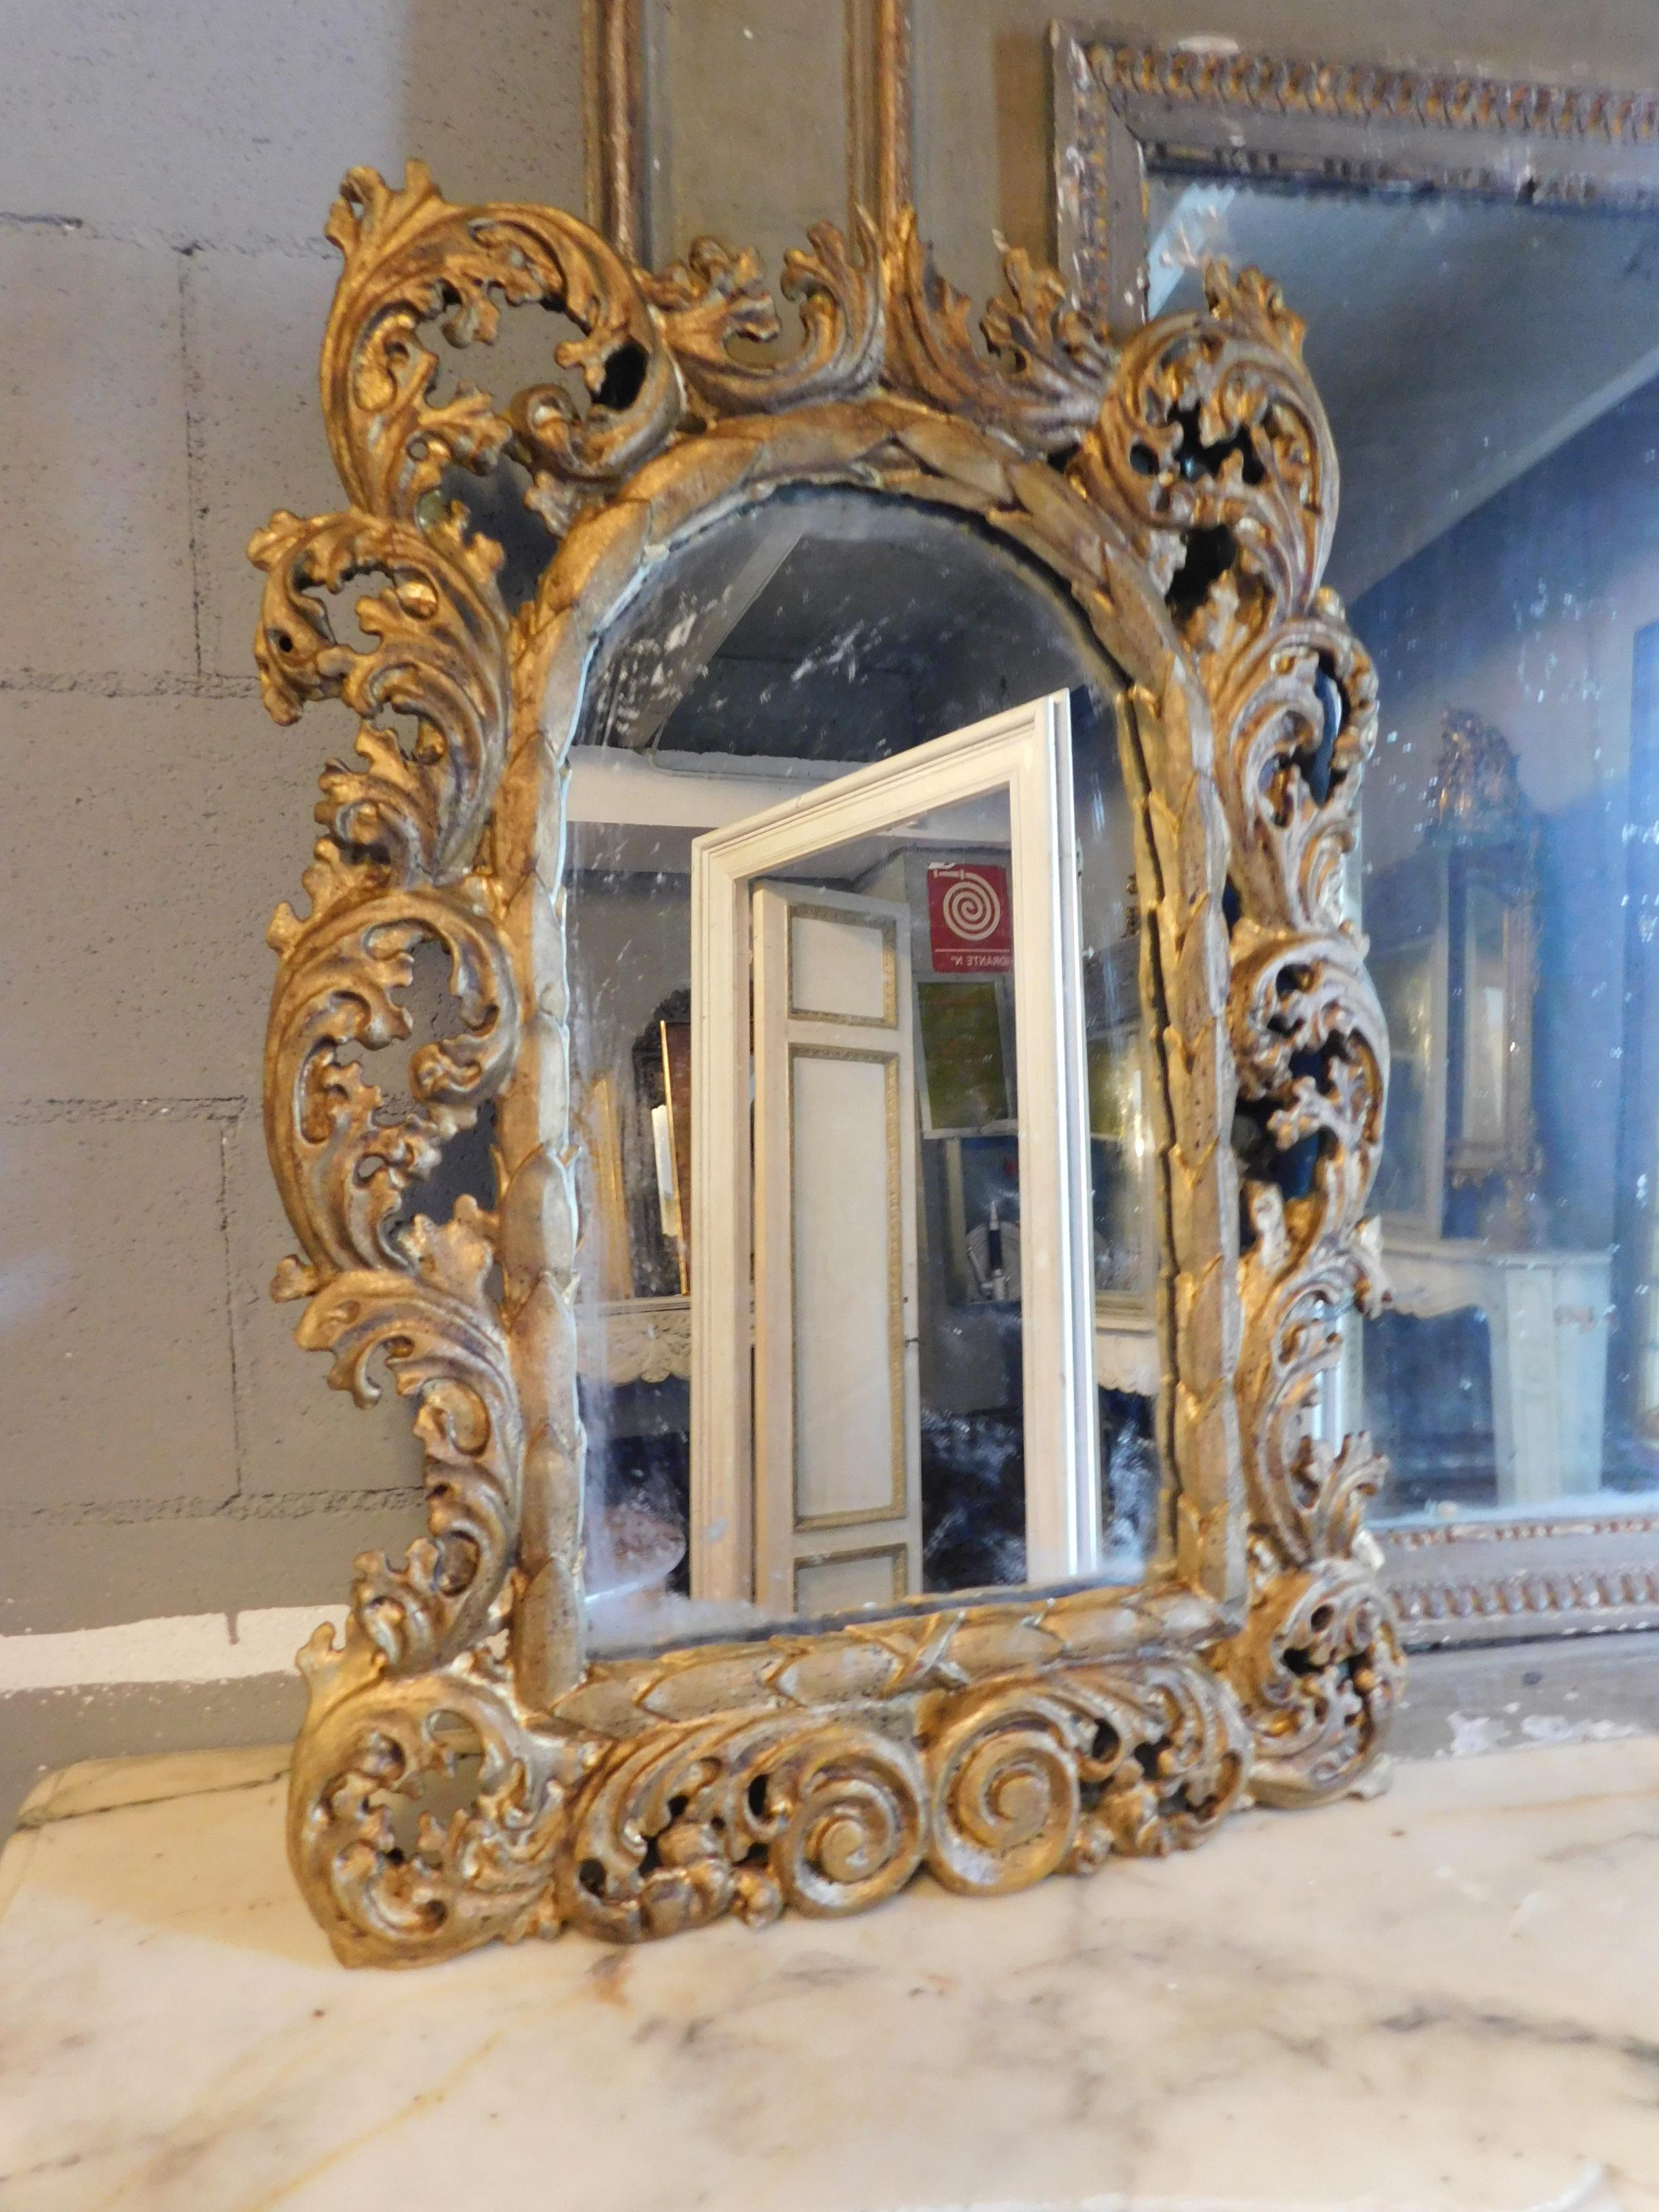 Antique golden mirror, richly carved with scrolls and curls, typical decorations of the eighteenth century, from Italy, in good conservation conditions and with great scenic effect, ideal for bathrooms, over fireplaces, living rooms or interiors of